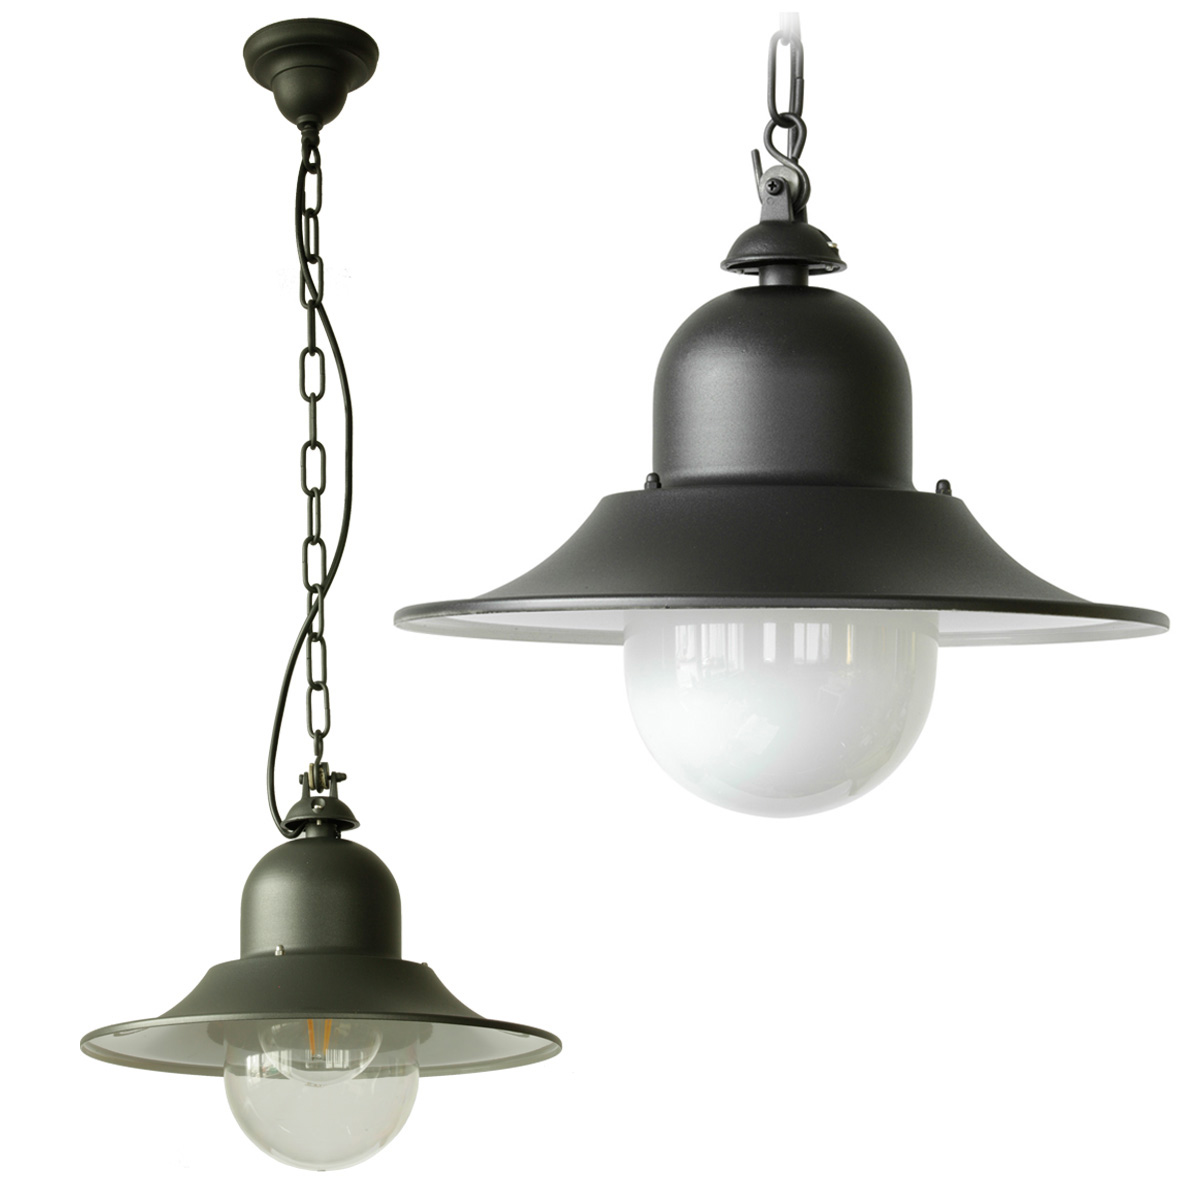 Italian Factory-Style Wall Light for Outdoor Use with Chain